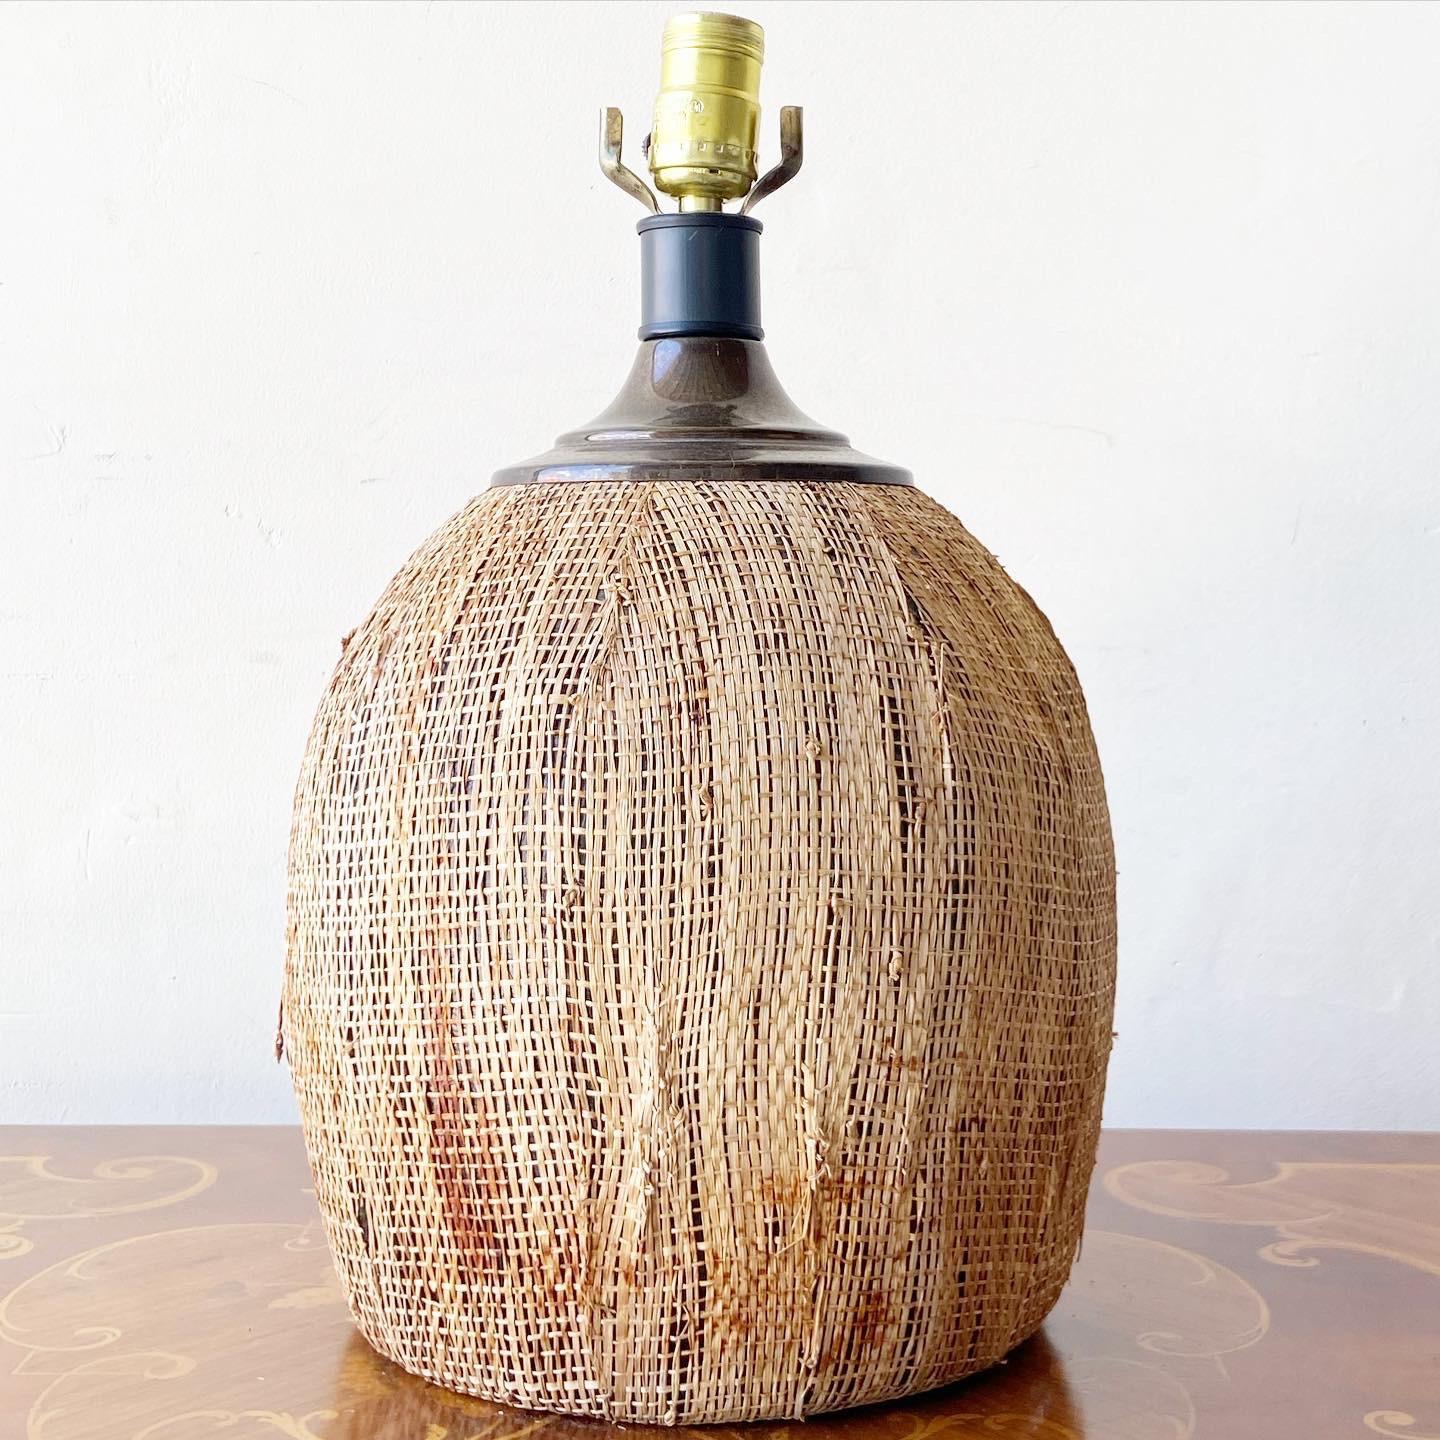 Exceptional vintage bohemian table lamps. Features a grass cloth wrapped body giving resemblance of a coconut.

3 way lighting.